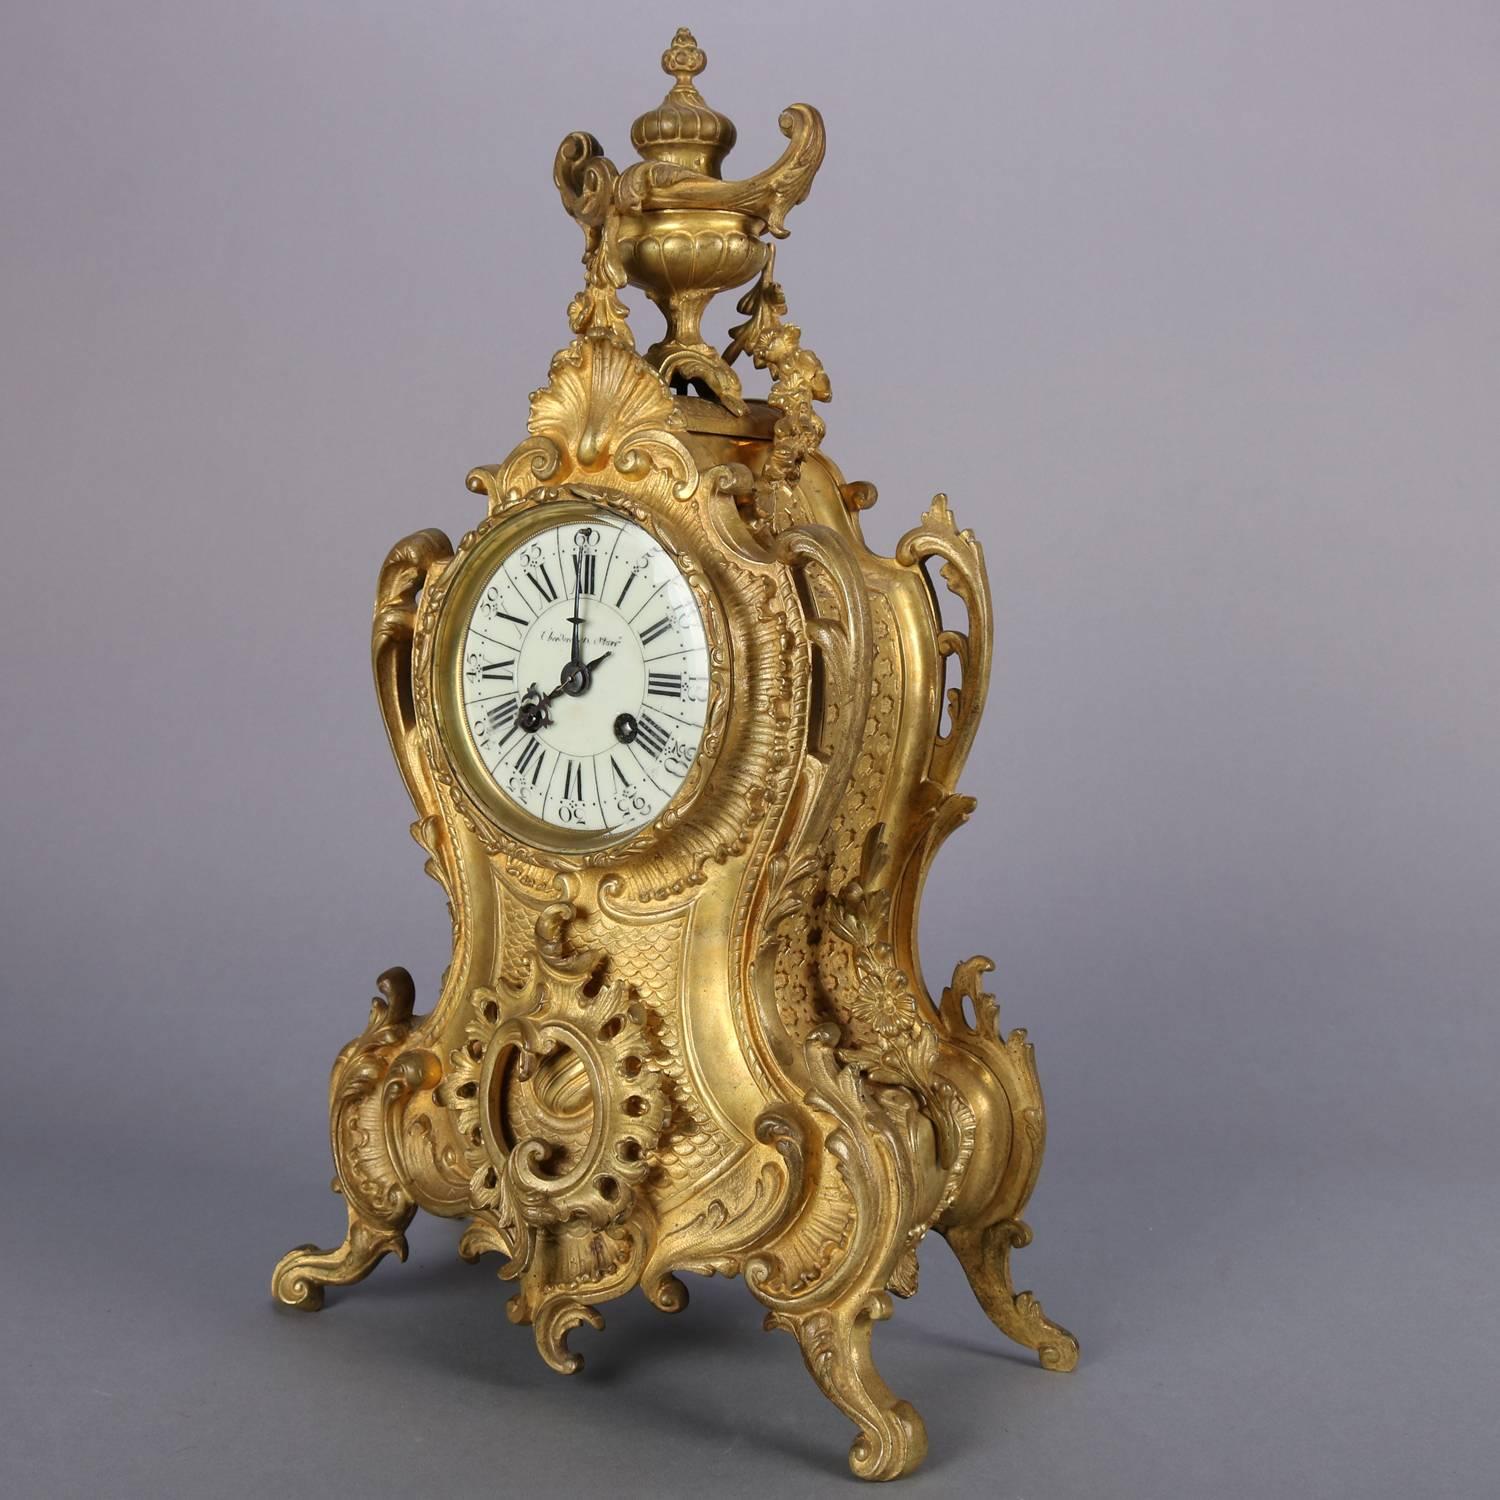 Antique Louis XV French Brevete mantel clock features gilt bronze case highly decorated with foliate and scrollwork with shell crest and urn finial atop scrolled feet, enamel face, movement stamped 